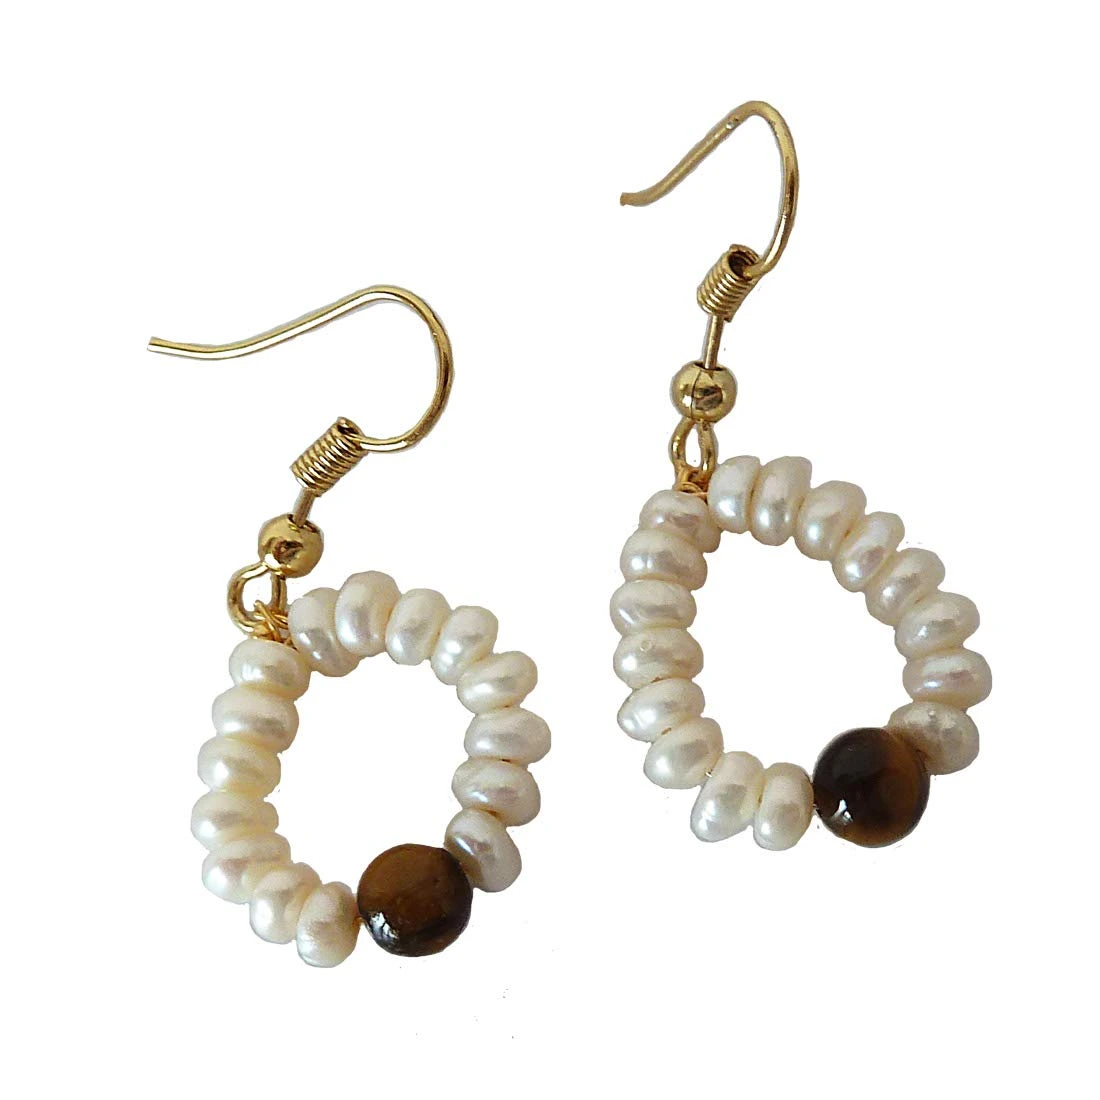 Dangling Circular Tiger Eye Beads, Freshwater Pearl and Gold Plated Wire Style Earrings (SE380)